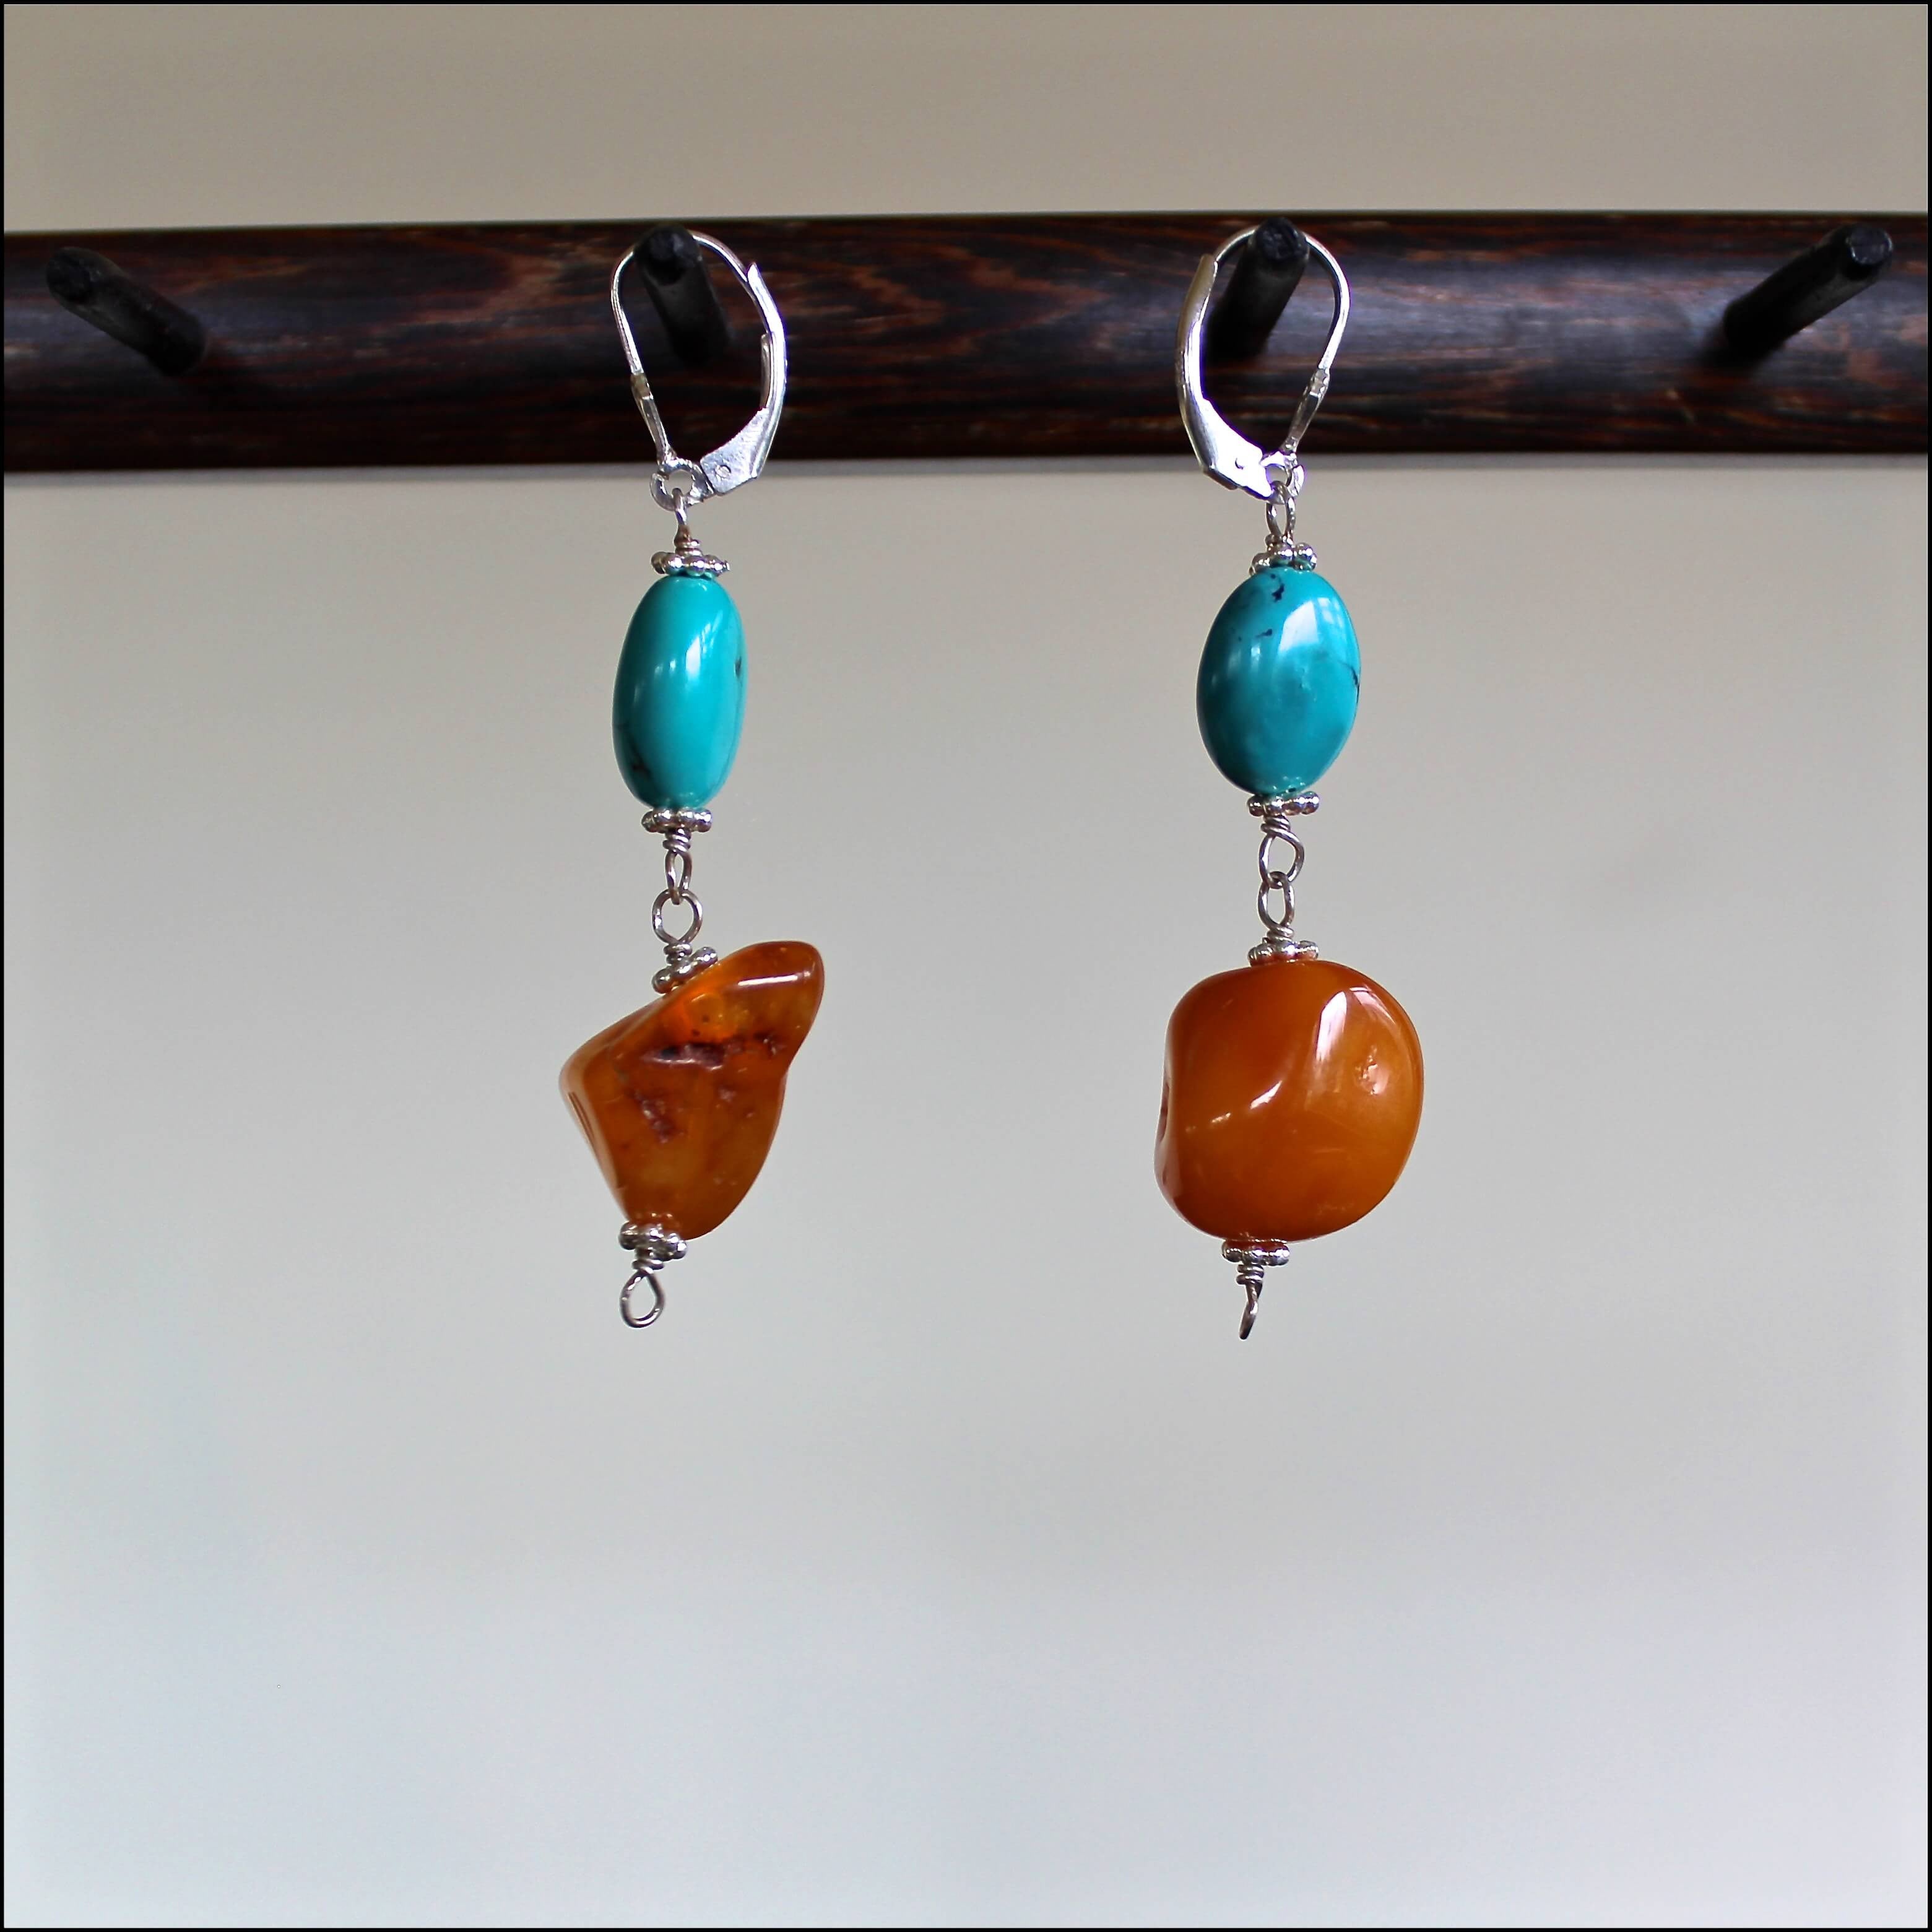 An eye level shot of the Butterscotch Baltic Amber Turquoise Bead and Sterling Silver Earrings hanging in front of a white background showing off the swirls inside of each opaque, one of a kind amber bead, and the minimal detail of the oval turquoise beads.